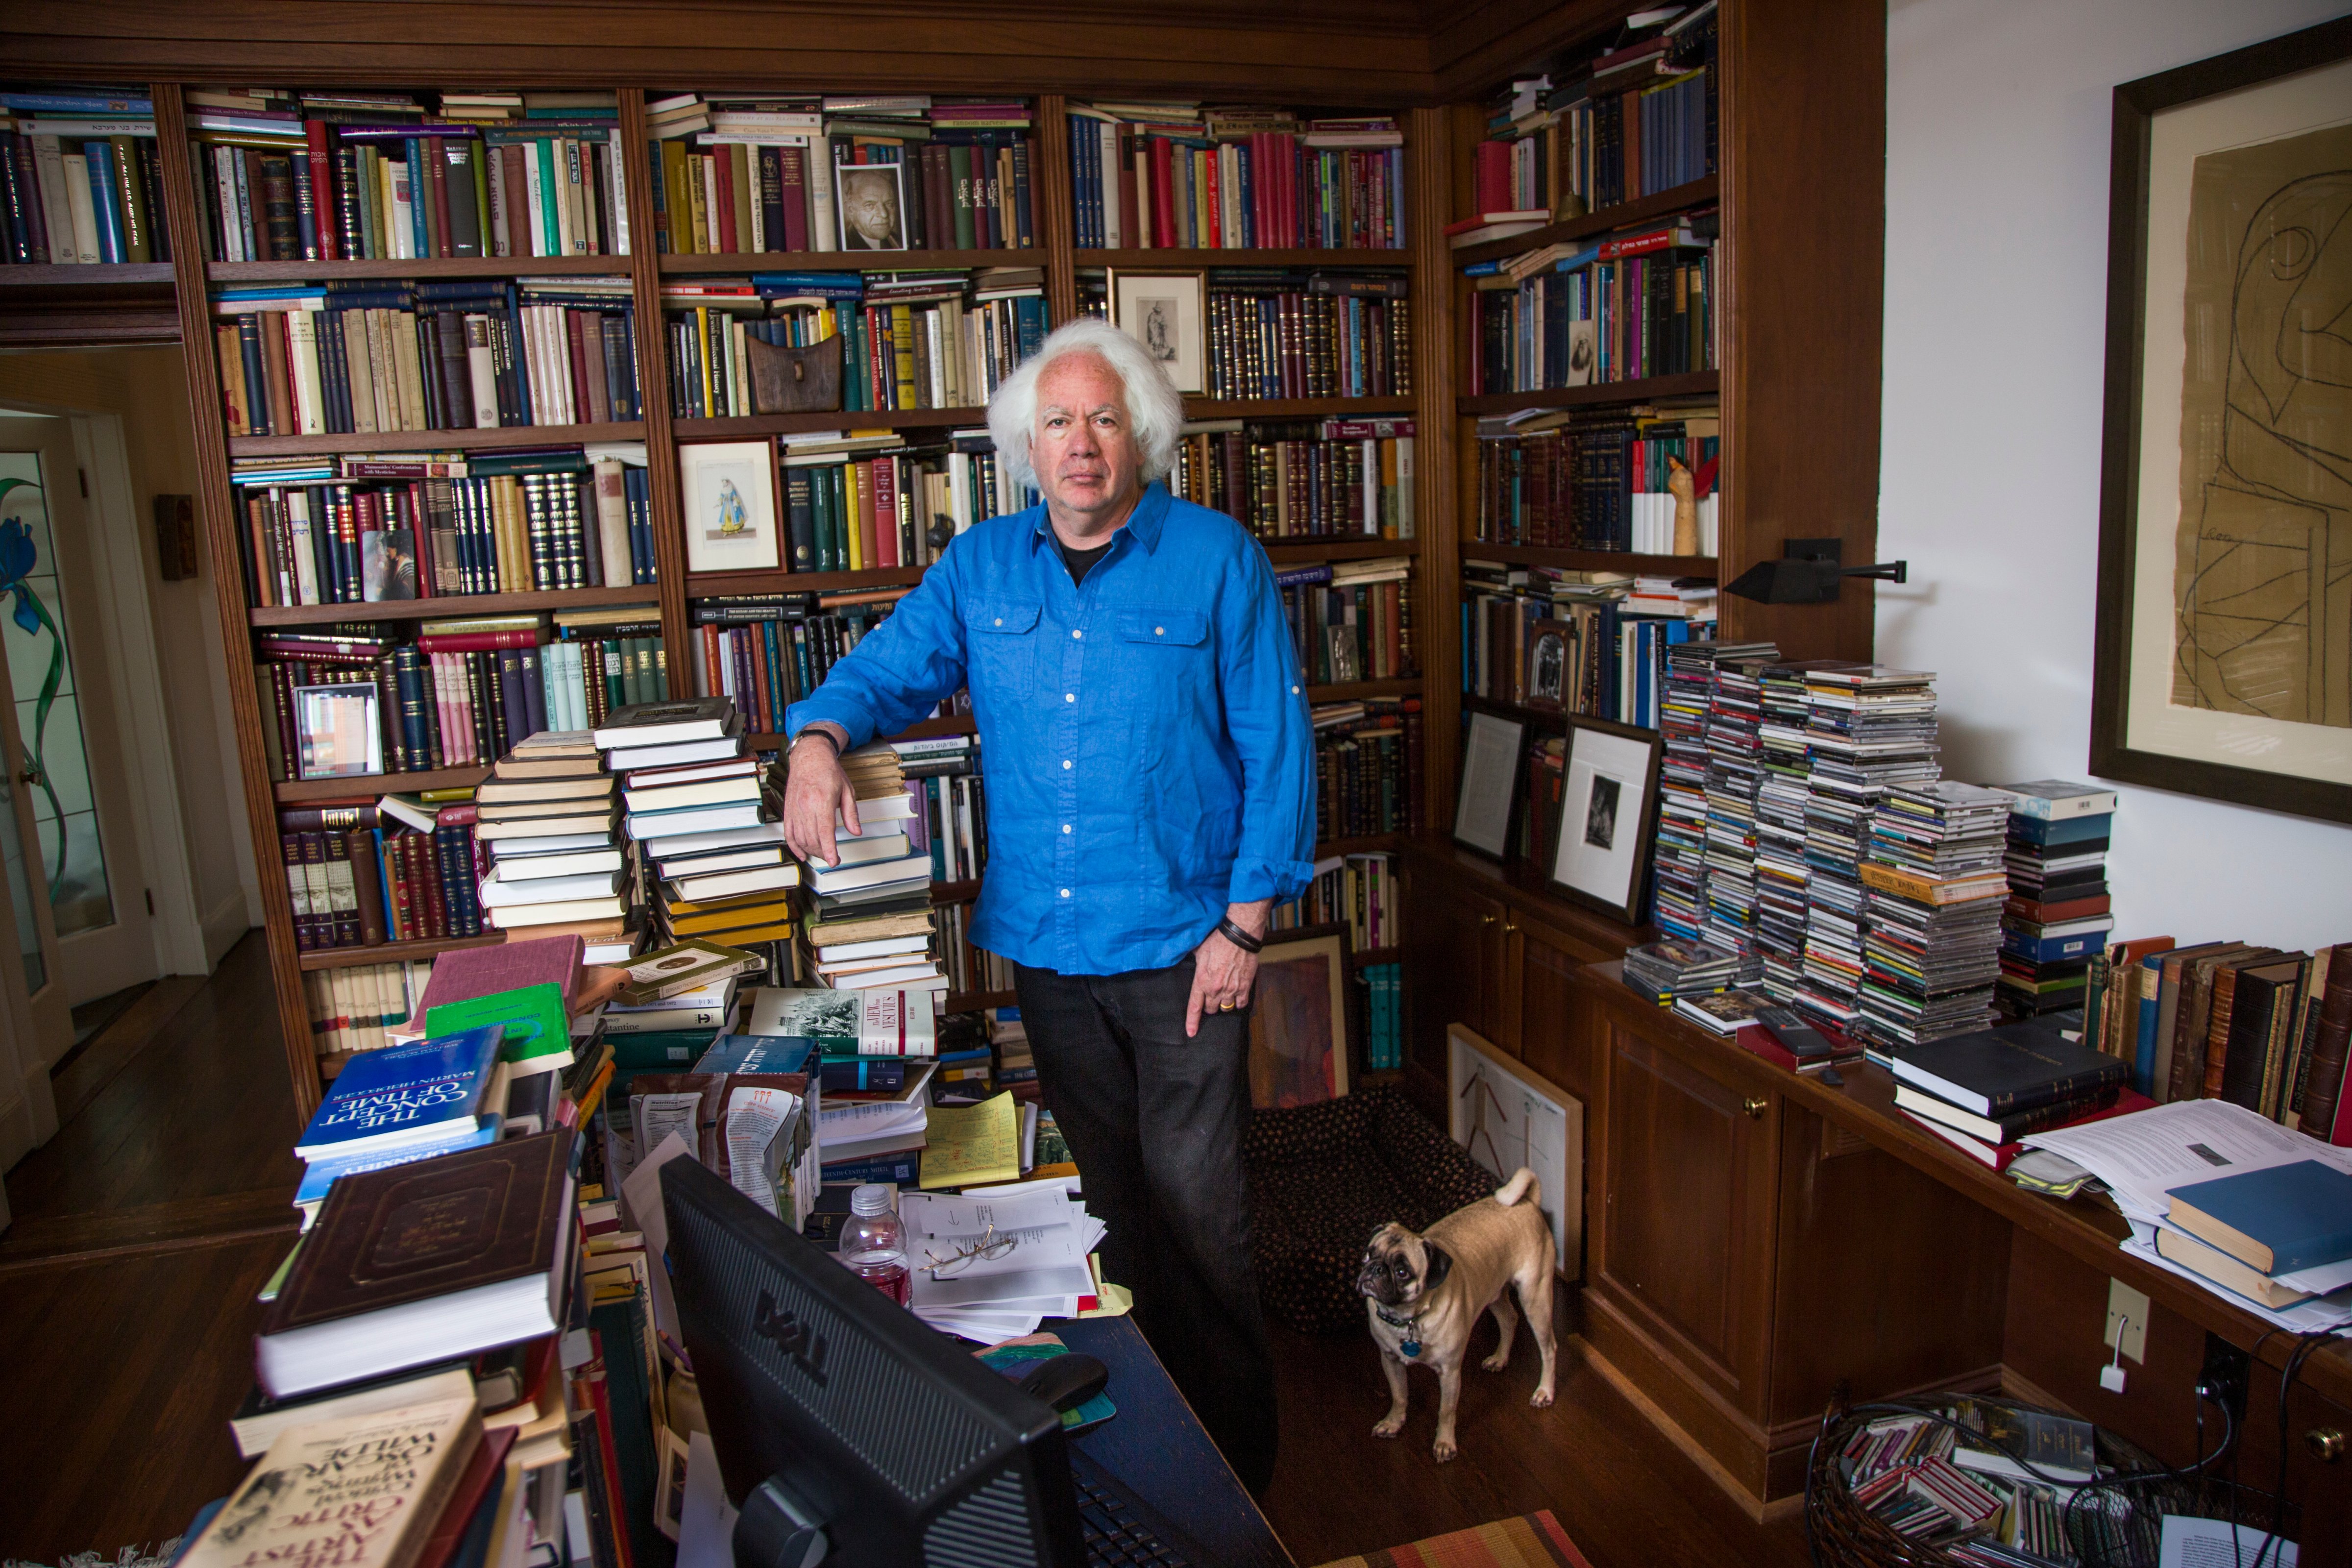 American author and literary critic Leon Wieseltier at his home in Washington, DC. Wieseltier is the long-serving literary editor at the New Republic has won the Israel Dan David Prize Board in 2013 for being "a foremost writer and thinker who confronts and engages with the central issues of our times, setting the standard for serious cultural discussion in the United States." (Photo by Brooks Kraft LLC/Corbis via Getty Images) (Brooks Kraft—Corbis via Getty Images.)